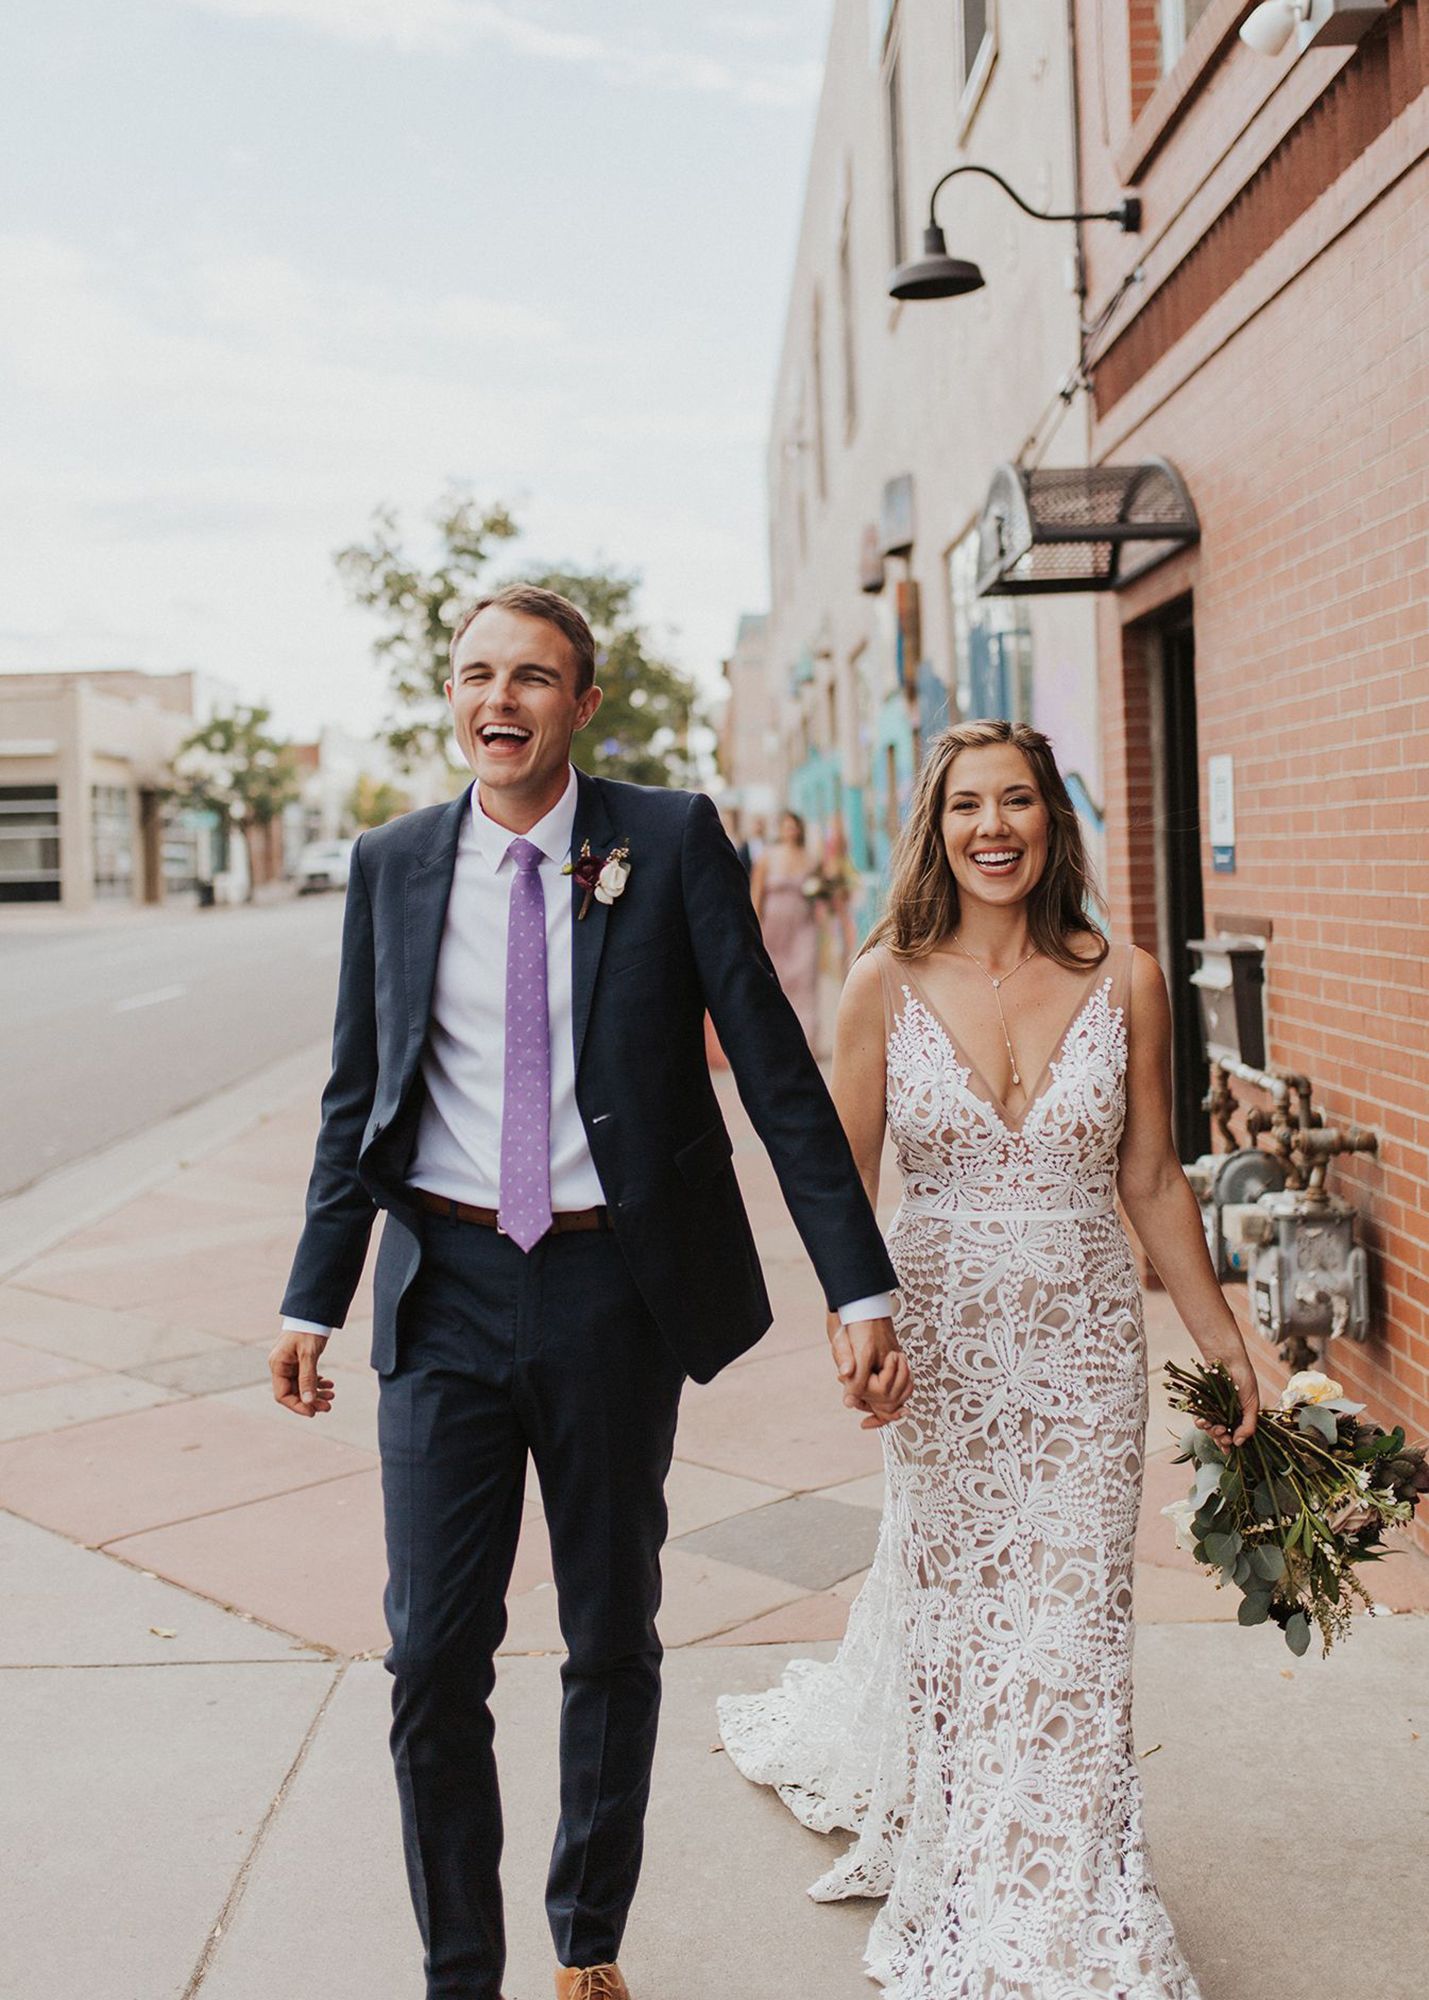  photo of a groom in a blue suit and bride walking outside and smiling while holding hands